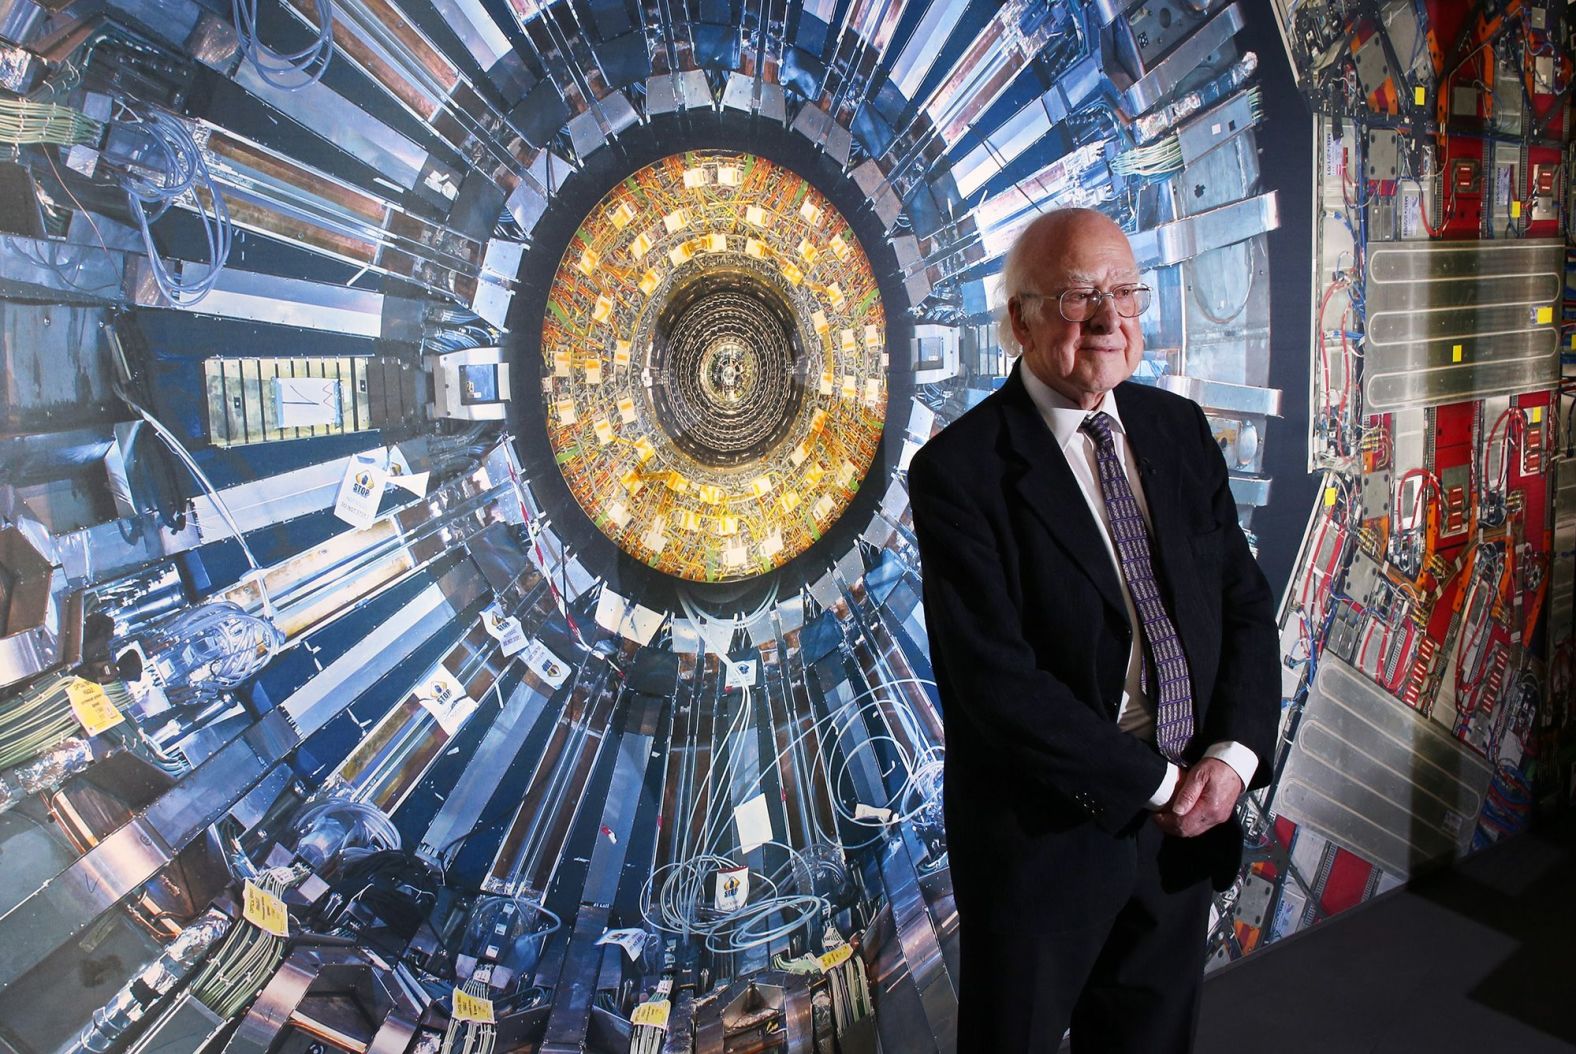 Physicist <a href="index.php?page=&url=https%3A%2F%2Fwww.cnn.com%2F2024%2F04%2F09%2Fworld%2Fpeter-higgs-physicist-nobel-winner-dies-scn%2Findex.html" target="_blank">Peter Higgs</a>, whose theory of an undetected particle in the universe changed science and was vindicated by a Nobel prize-winning discovery half a century later, died at the age of 94, the University of Edinburgh said on April 9.